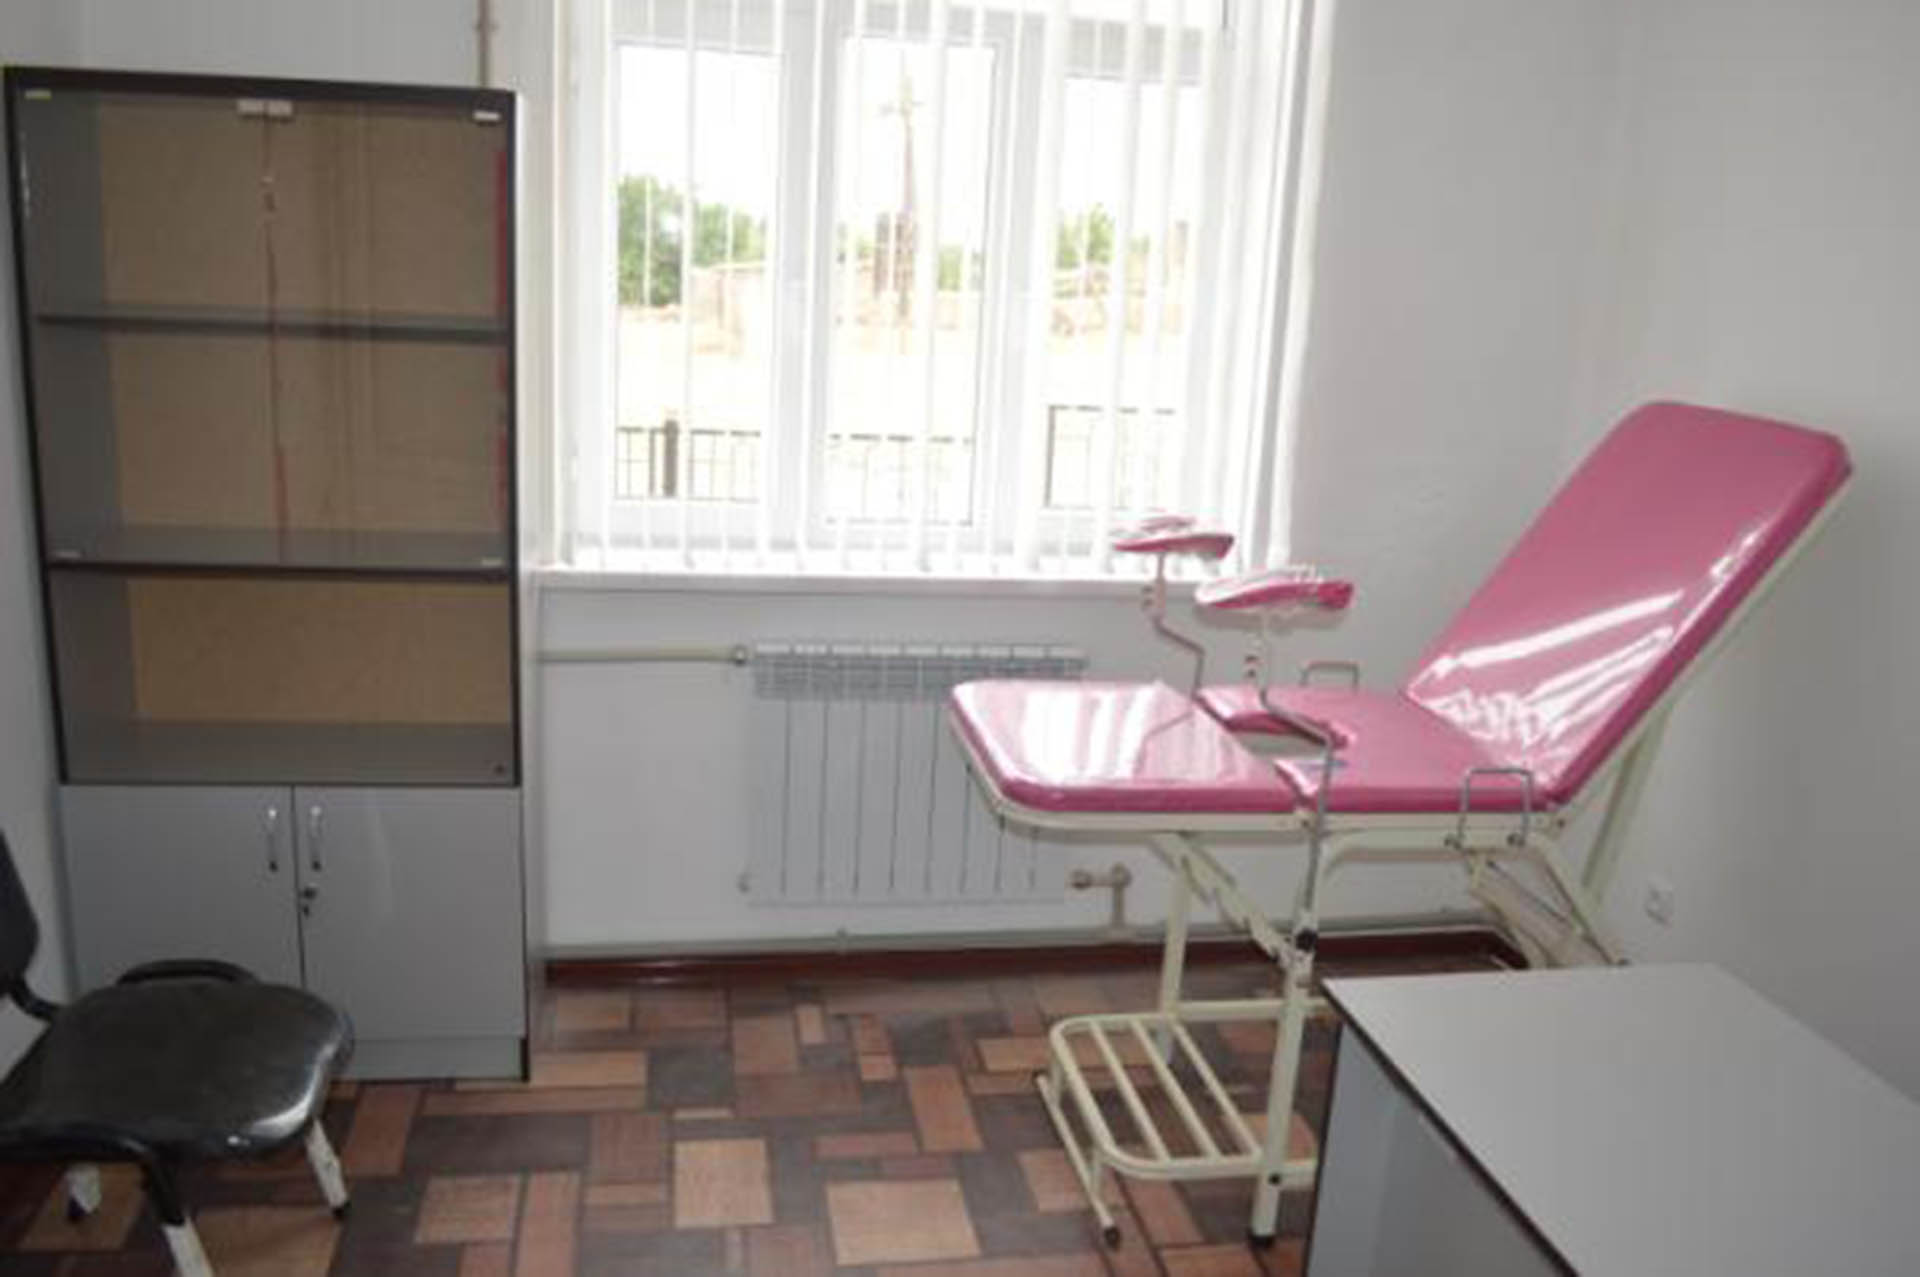 <p> Doctor's office: gynecologist's room</p>